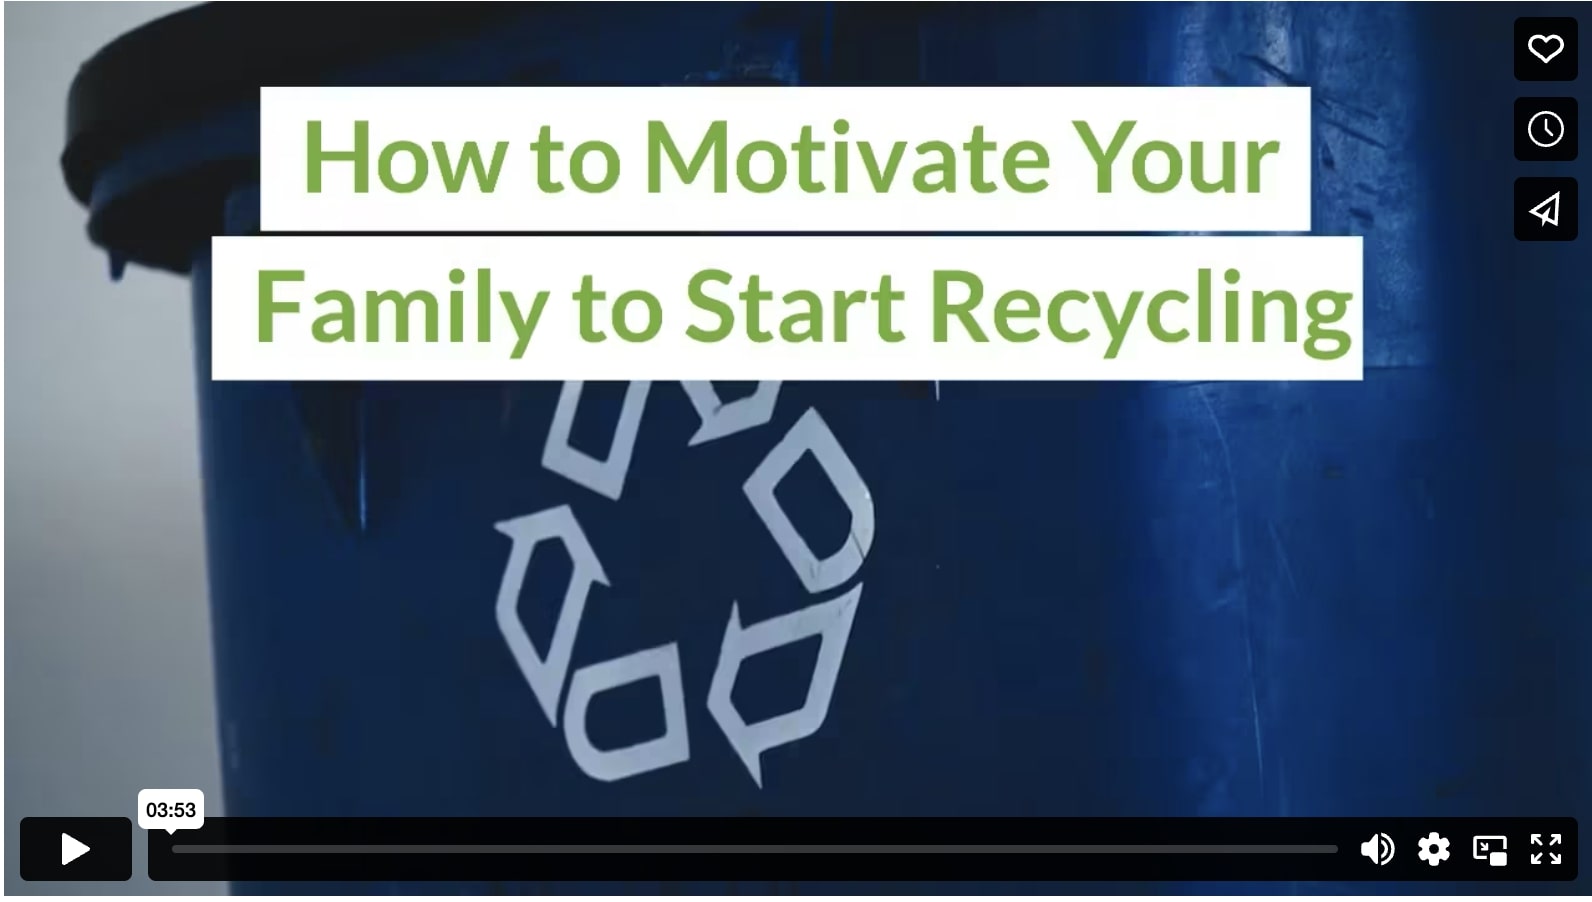 How to Motivate Your Family to Start Recycling